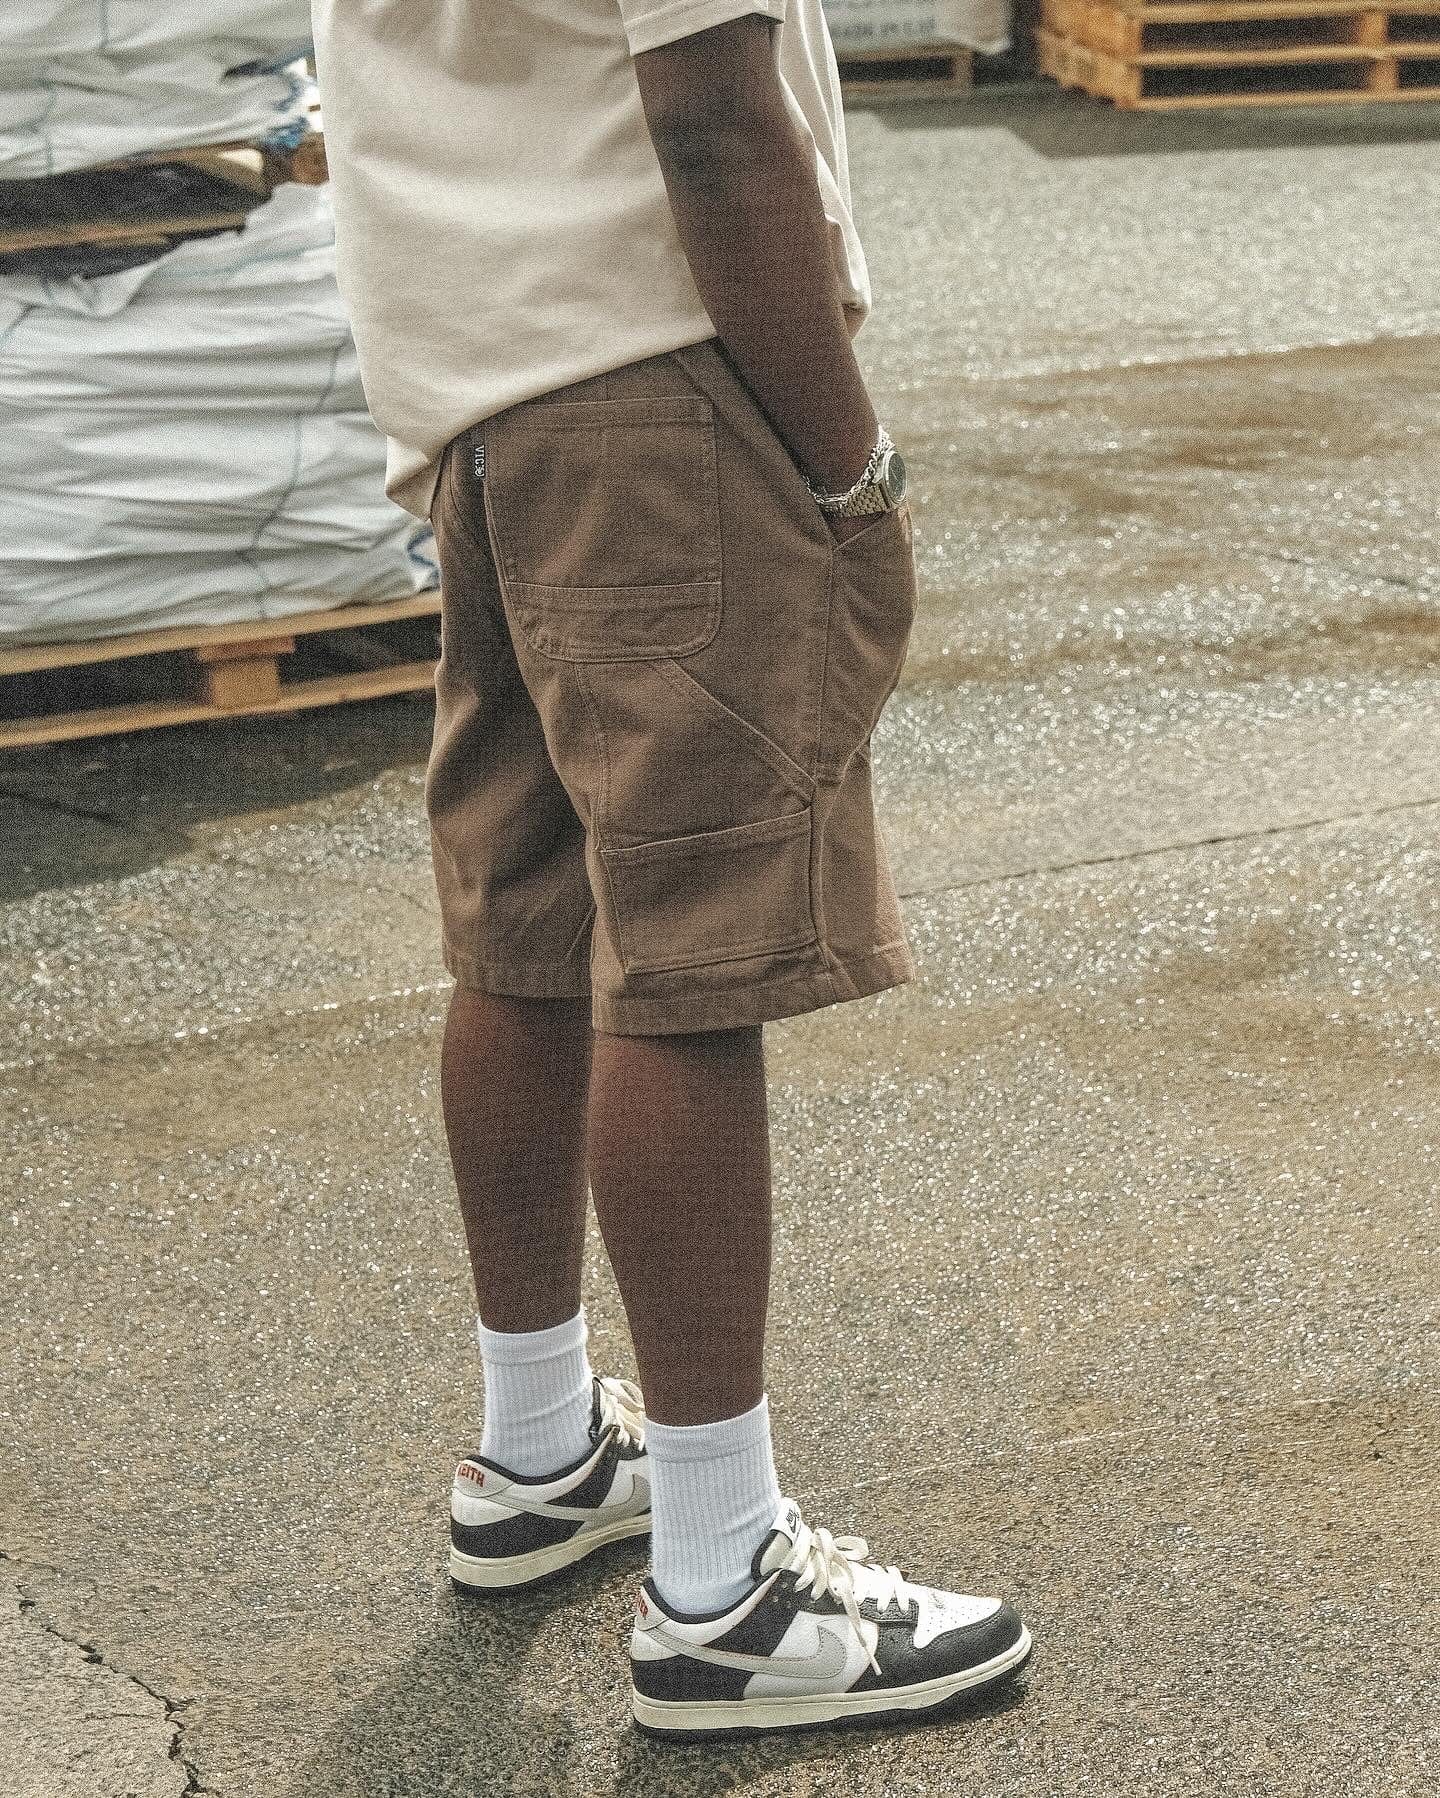 Discover our Canvas Work Shorts: vintage-inspired yet modern. Crafted from heavyweight 365 gsm cotton duck canvas, they offer a 90s retro style in a regular fit. Featuring a YKK zip fly, elastic back waistband, and VIC label flag, they're durable and comfortable. With 2 side pockets, 2 back pockets, and dual back pockets with a coin pocket, they're practical for work or leisure. Order up for a generous fit. Elevate your style with our Canvas Work Shorts!